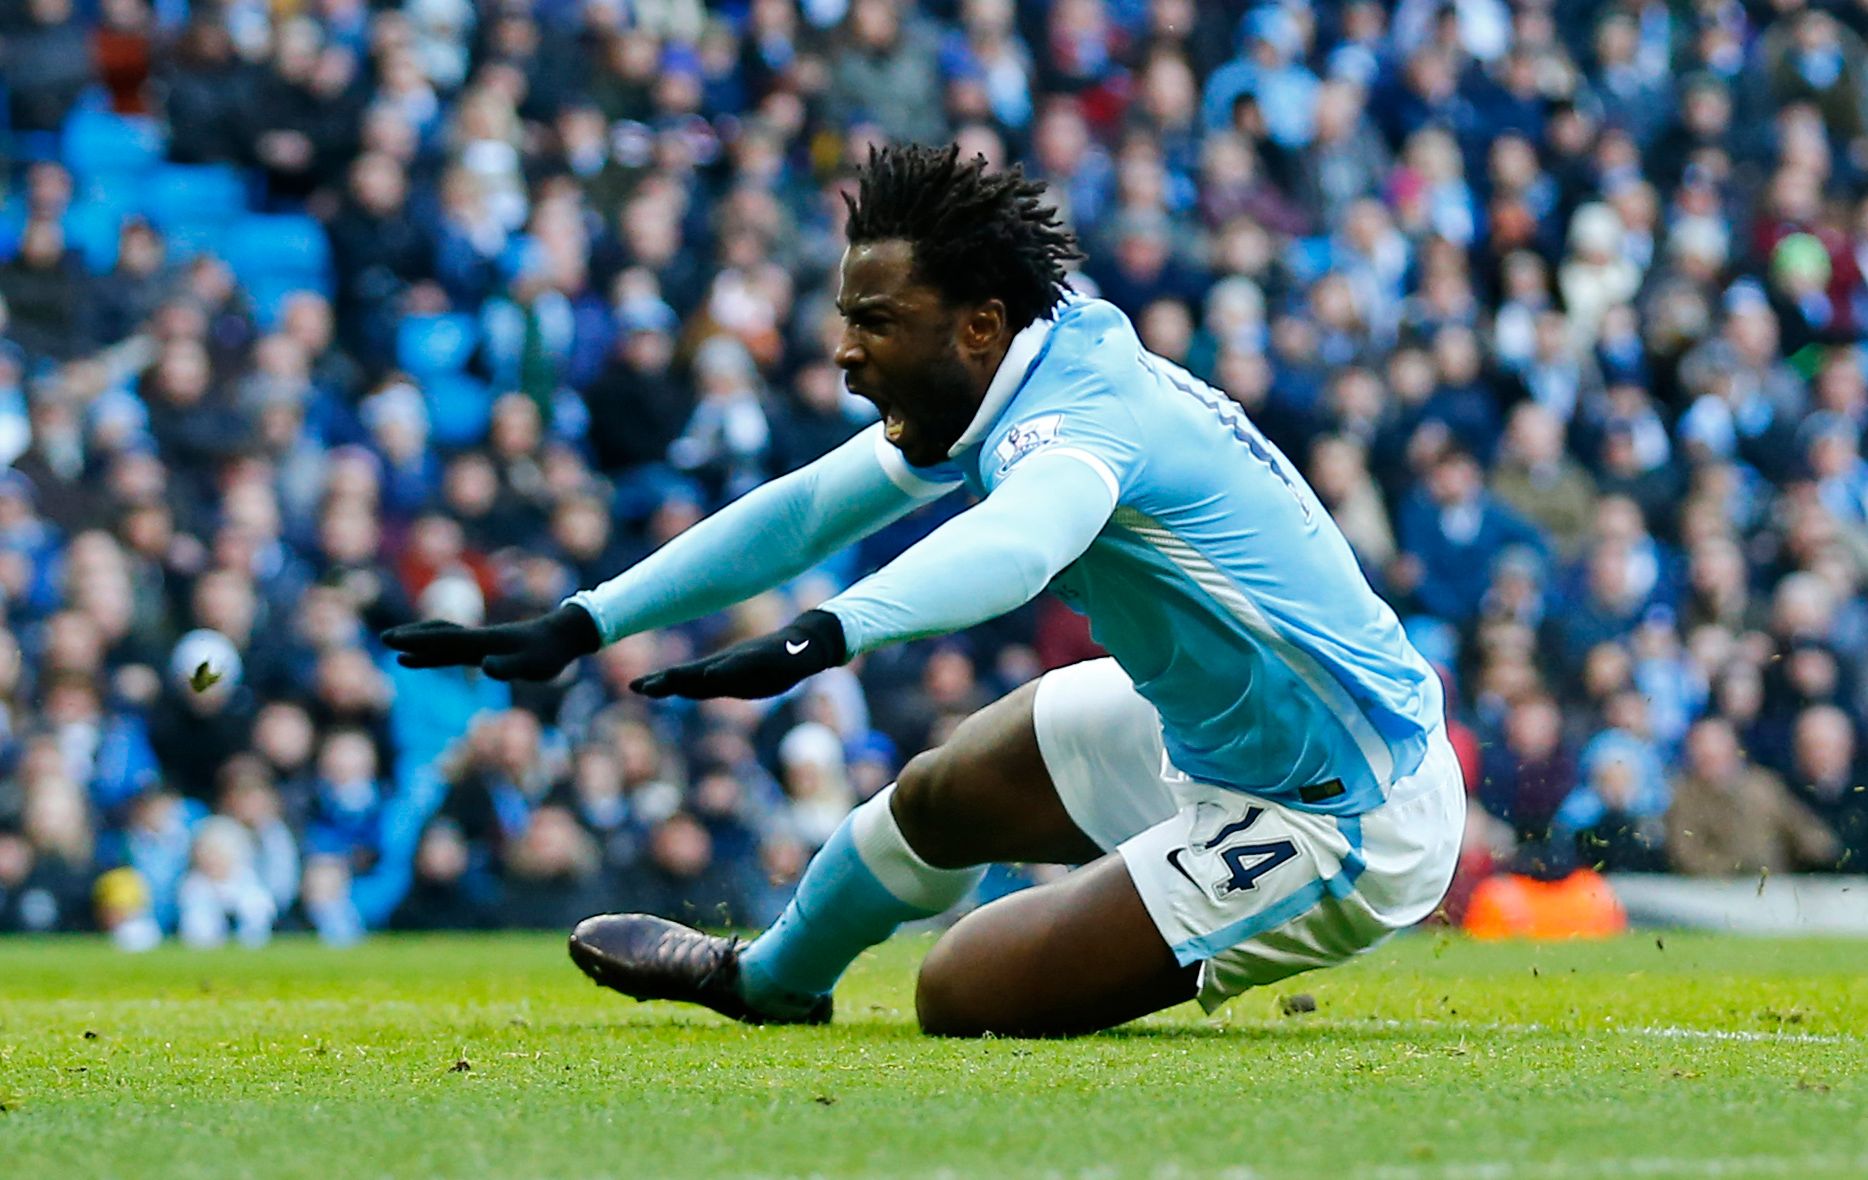 Football Soccer - Manchester City v Aston Villa - Barclays Premier League - Etihad Stadium - 5/3/16 
Manchester City's Wilfried Bony goes down 
Reuters / Darren Staples 
Livepic 
EDITORIAL USE ONLY. No use with unauthorized audio, video, data, fixture lists, club/league logos or "live" services. Online in-match use limited to 45 images, no video emulation. No use in betting, games or single club/league/player publications.  Please contact your account representative for further details.